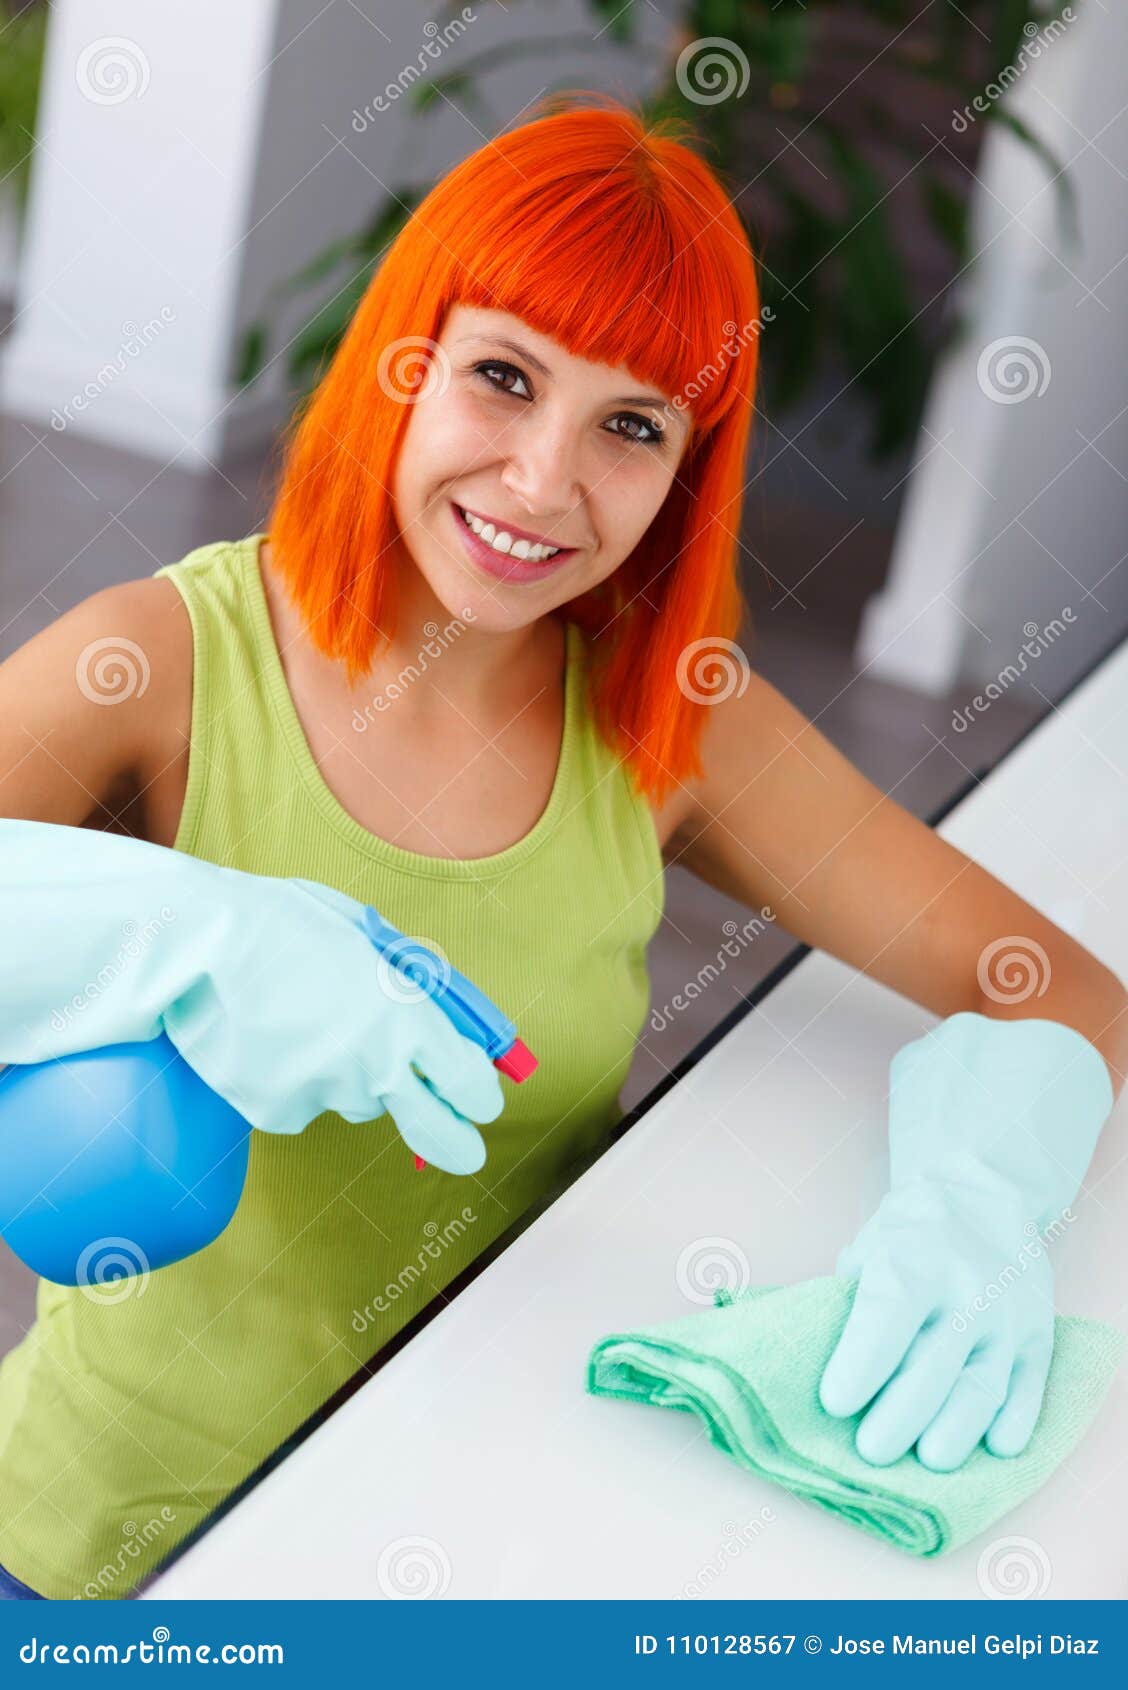 Red Hair Housewife Cleaning Her Home Stock Image Image Of Chores Housekeeping 110128567 